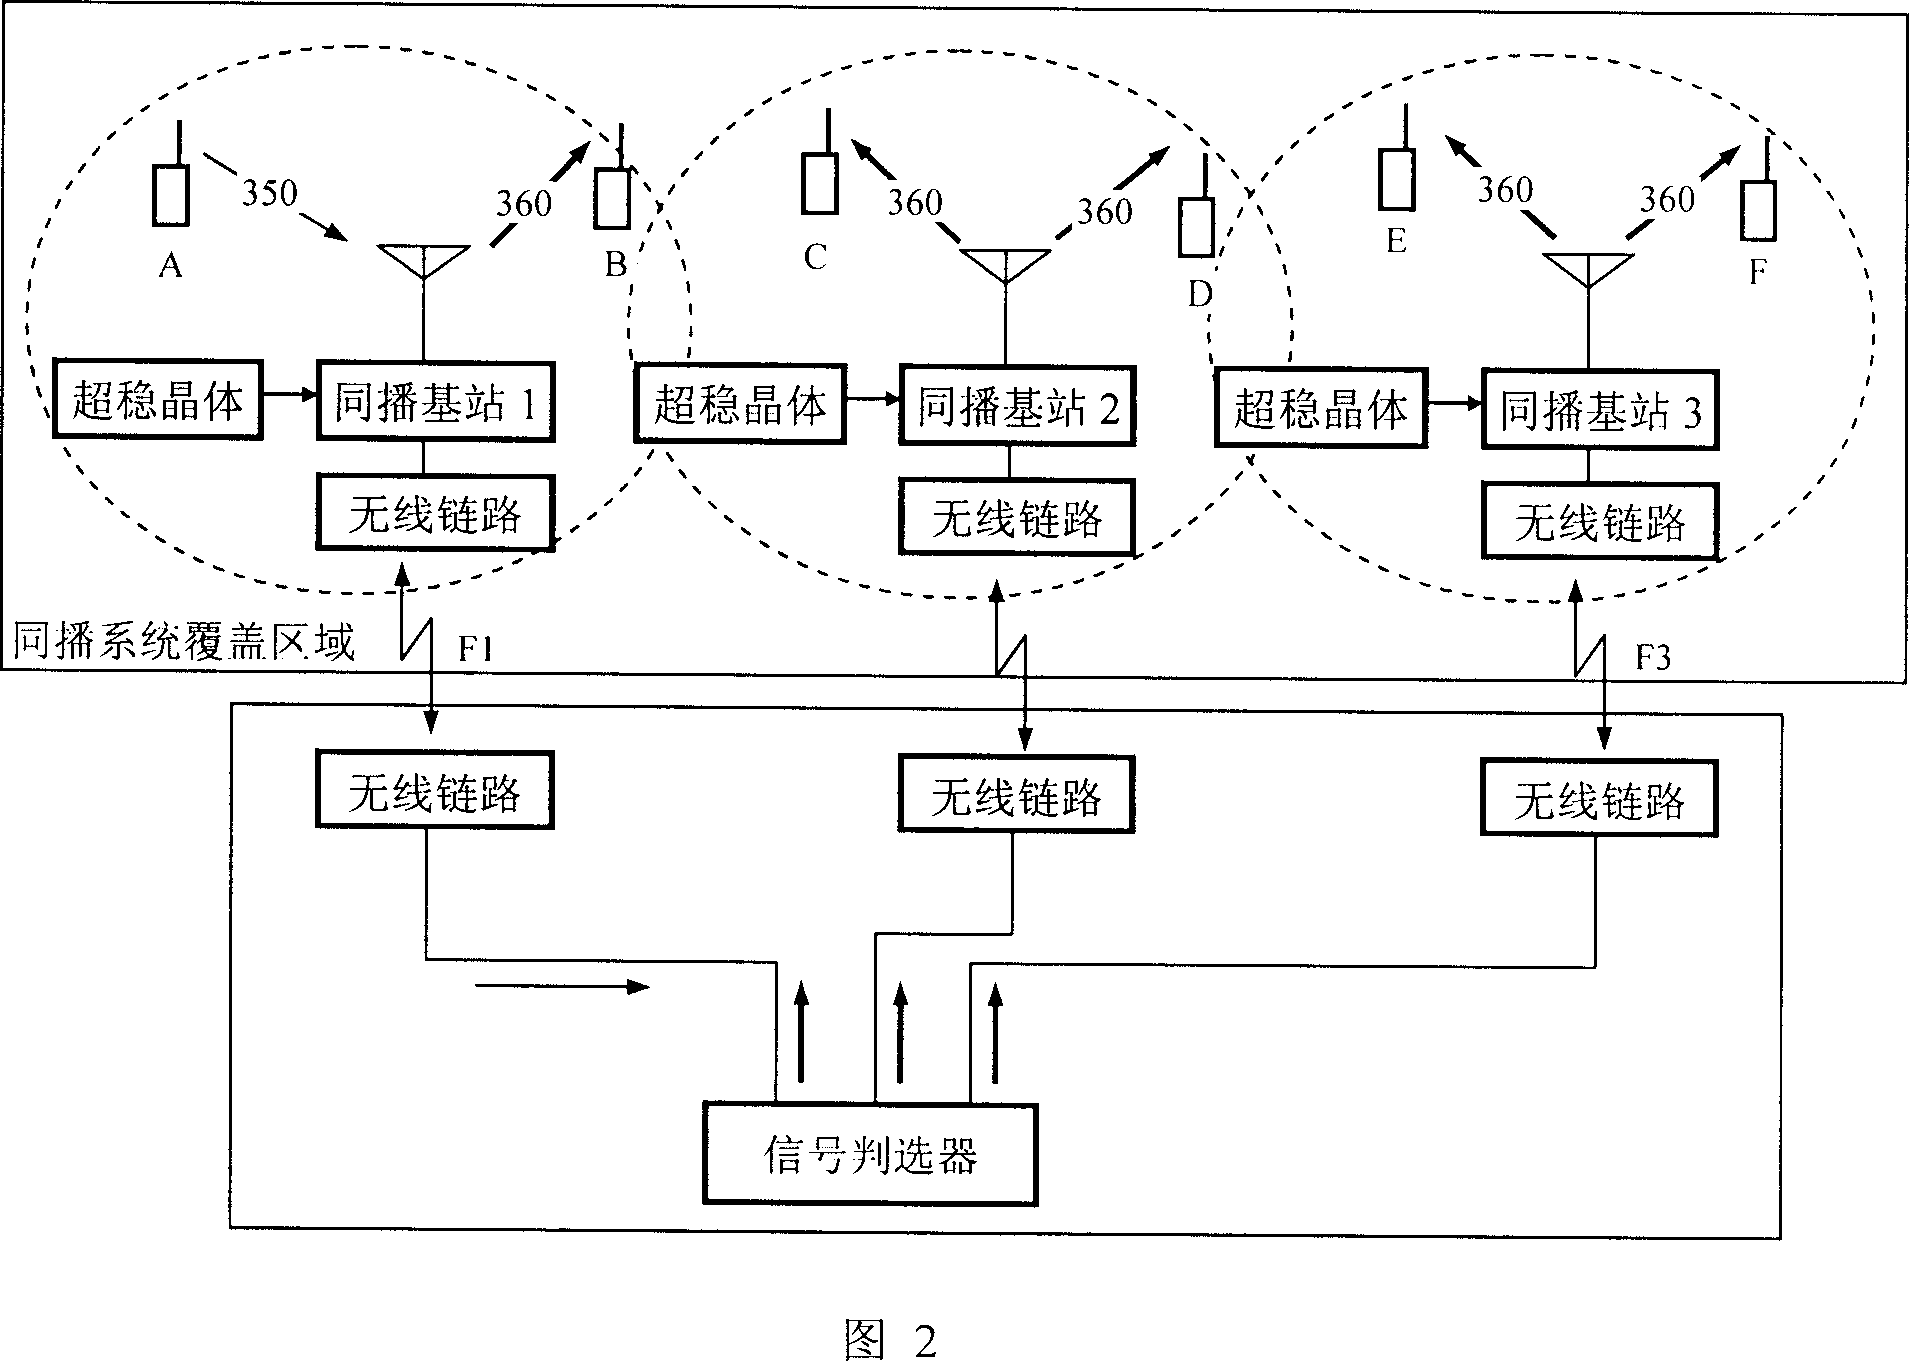 Bidirectional common frequency and broadcasting system for wireless same-frequency link mode